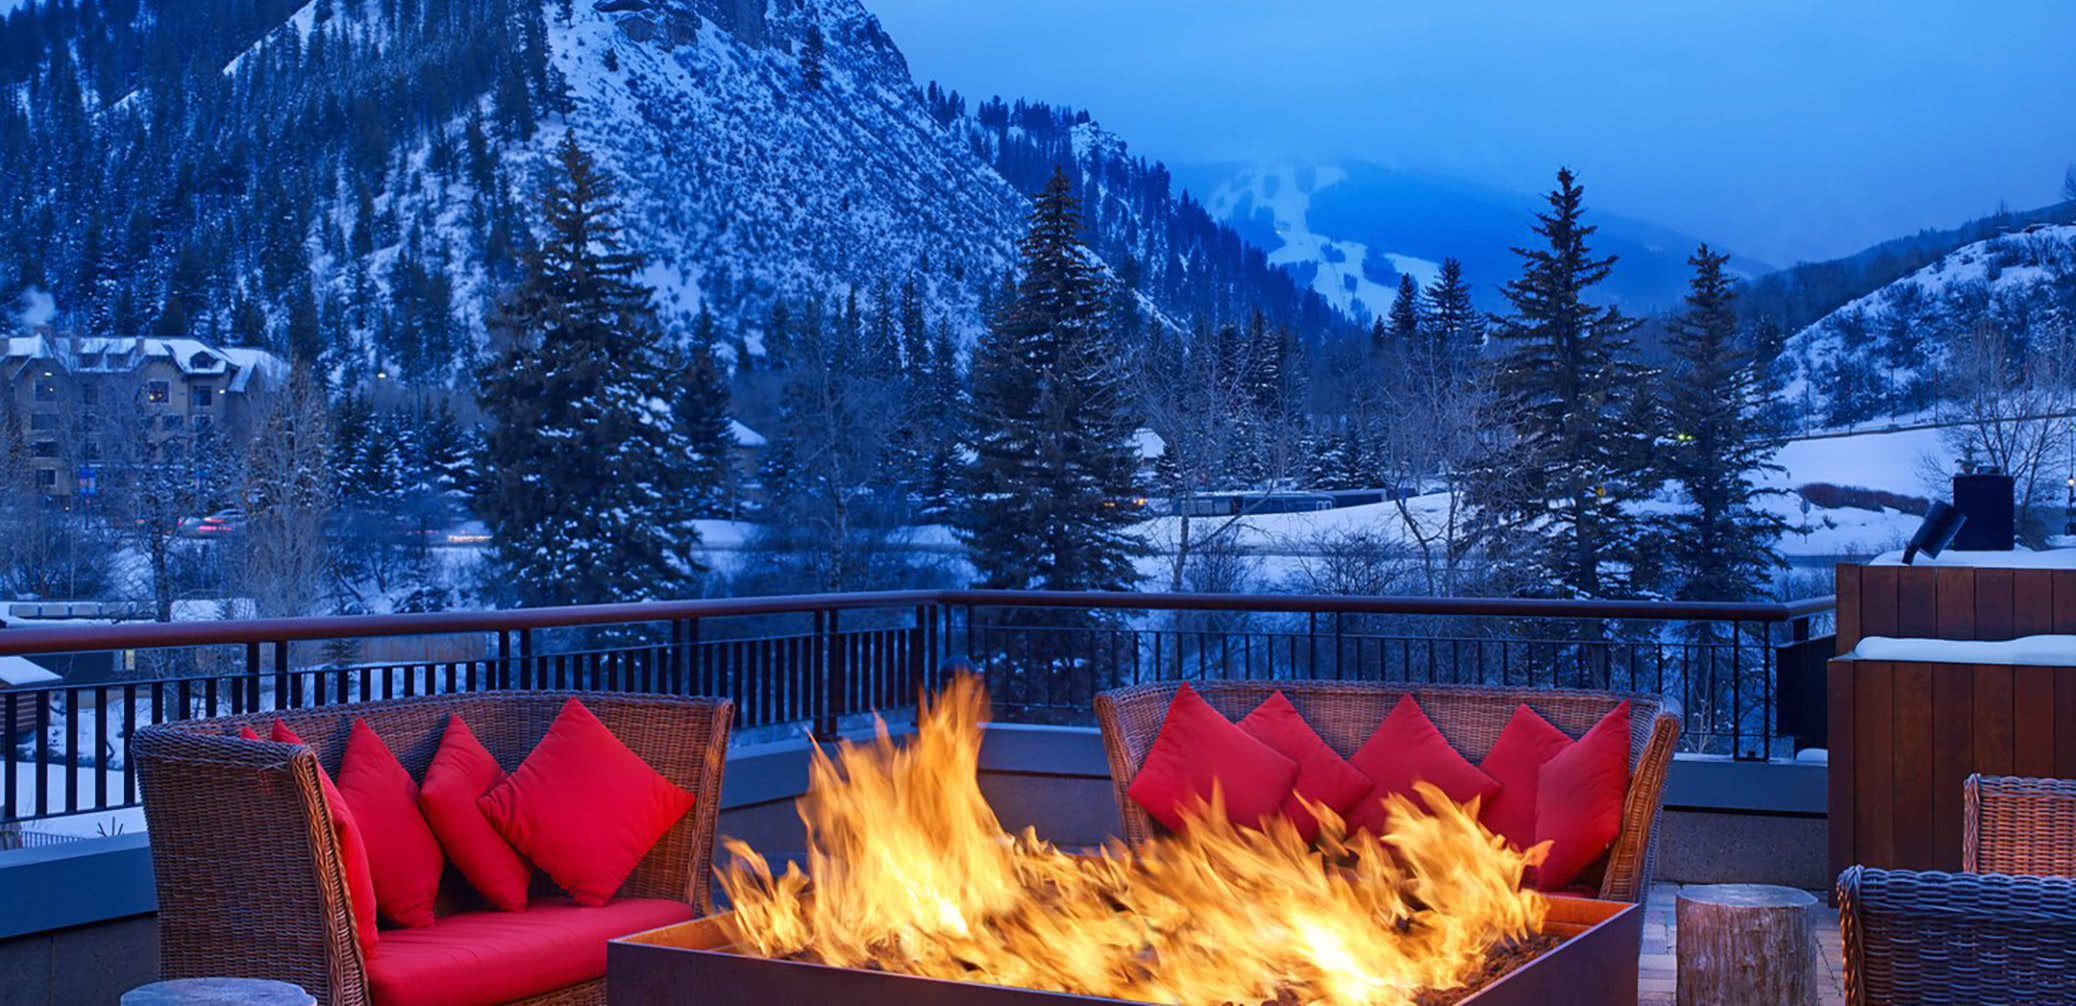 Review: The Westin Riverfront Resort & Spa Avon, Vail Valley